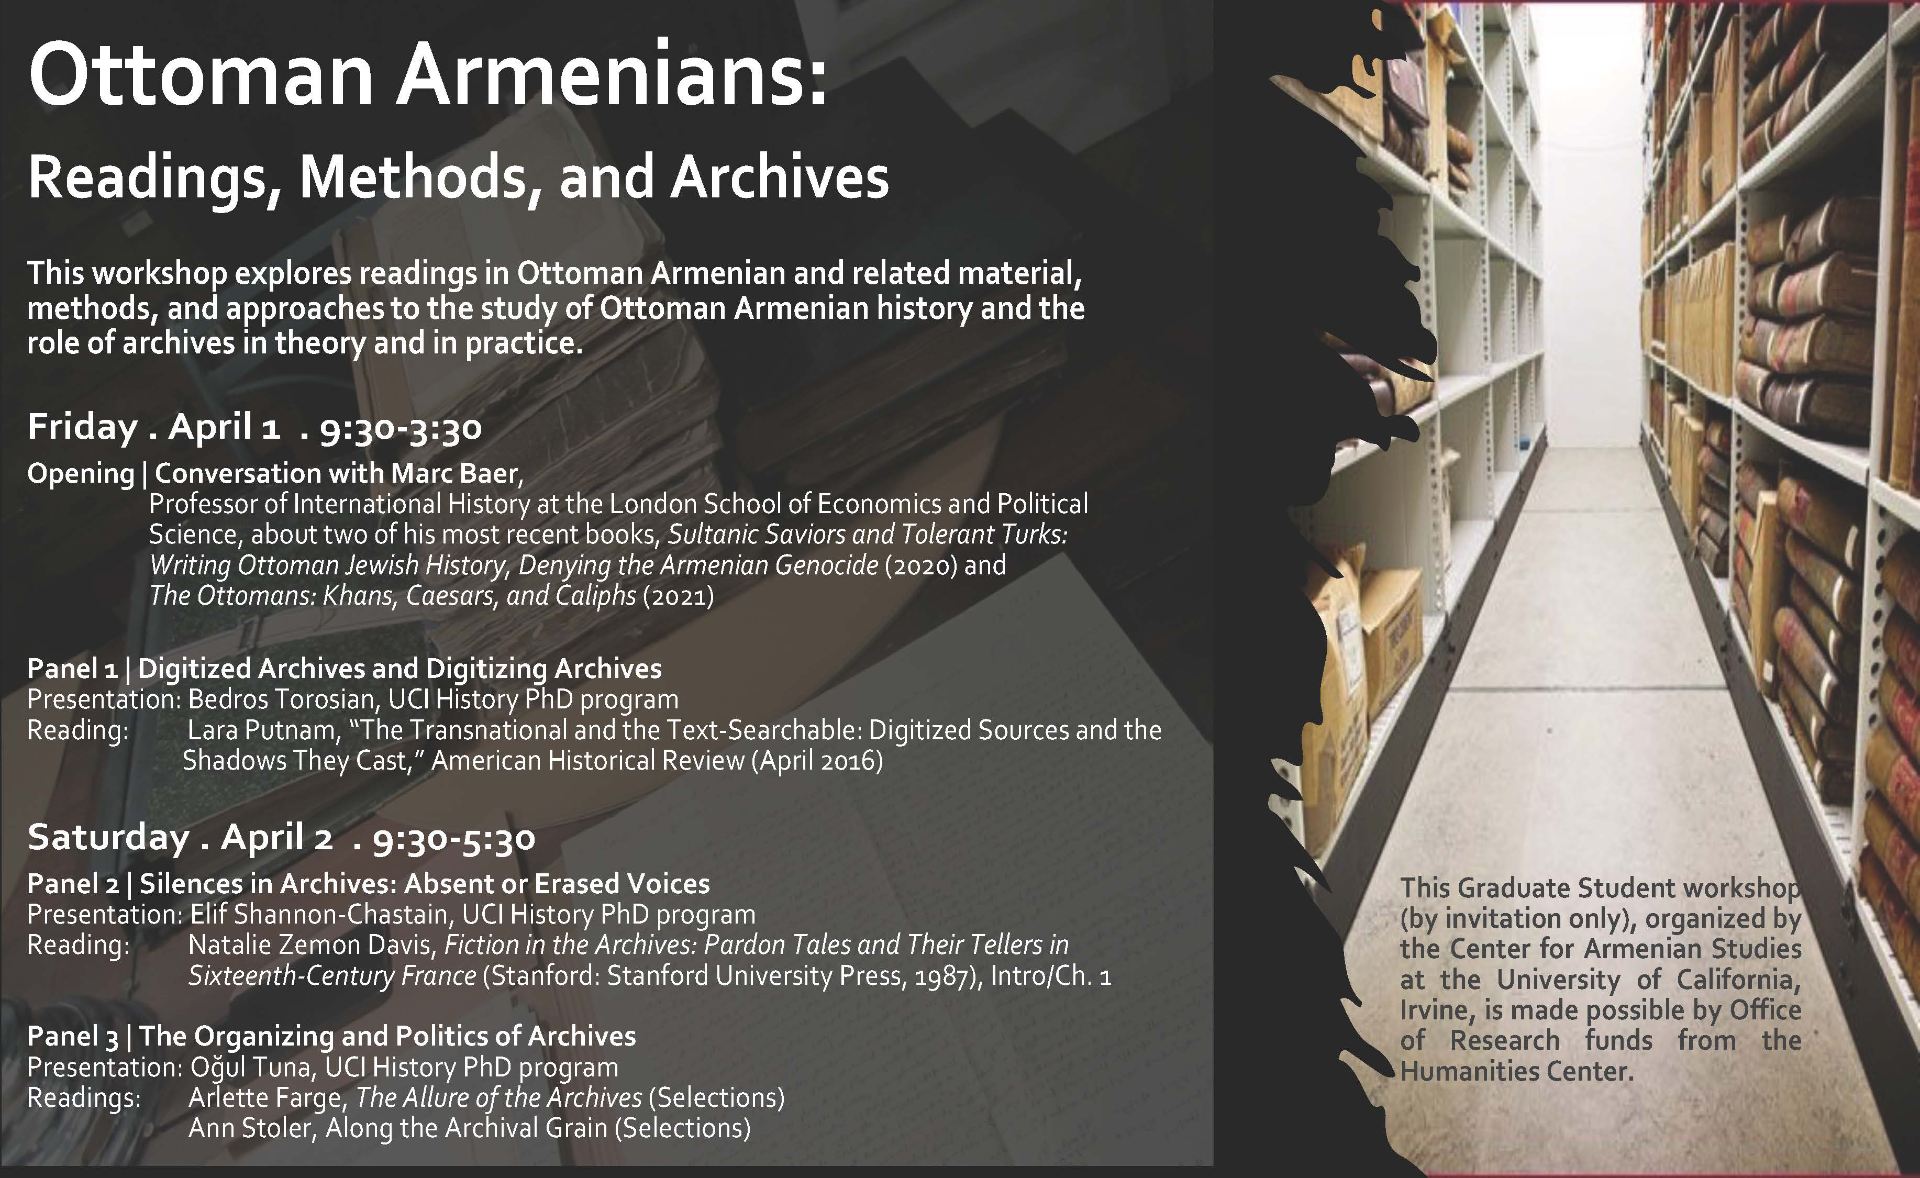 Poster for "Ottoman Armenians: Readings, Methods, and Archives - Graduate Student Workshop"